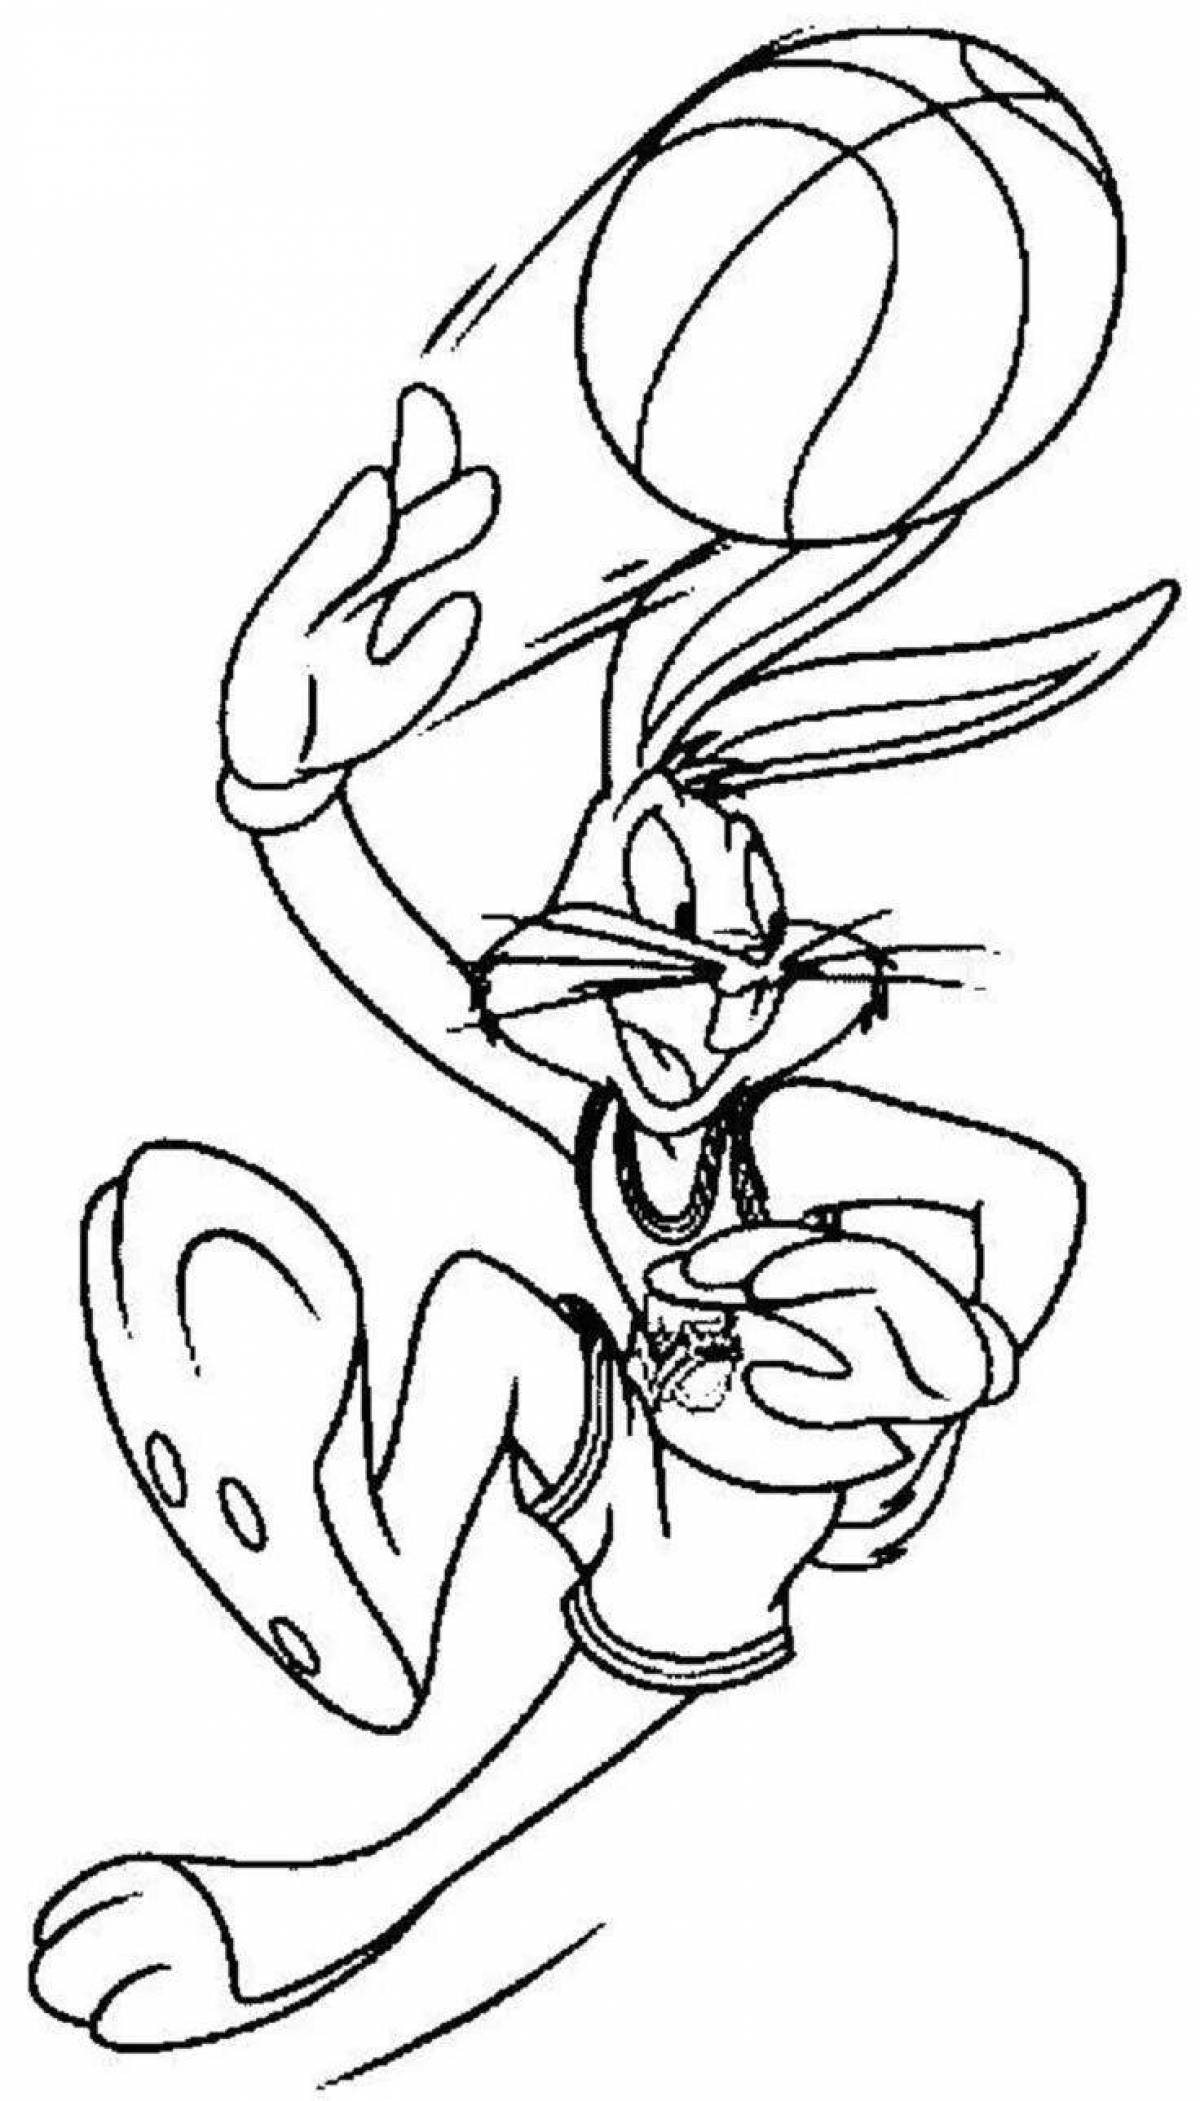 Giggly coloring page bunny bugs